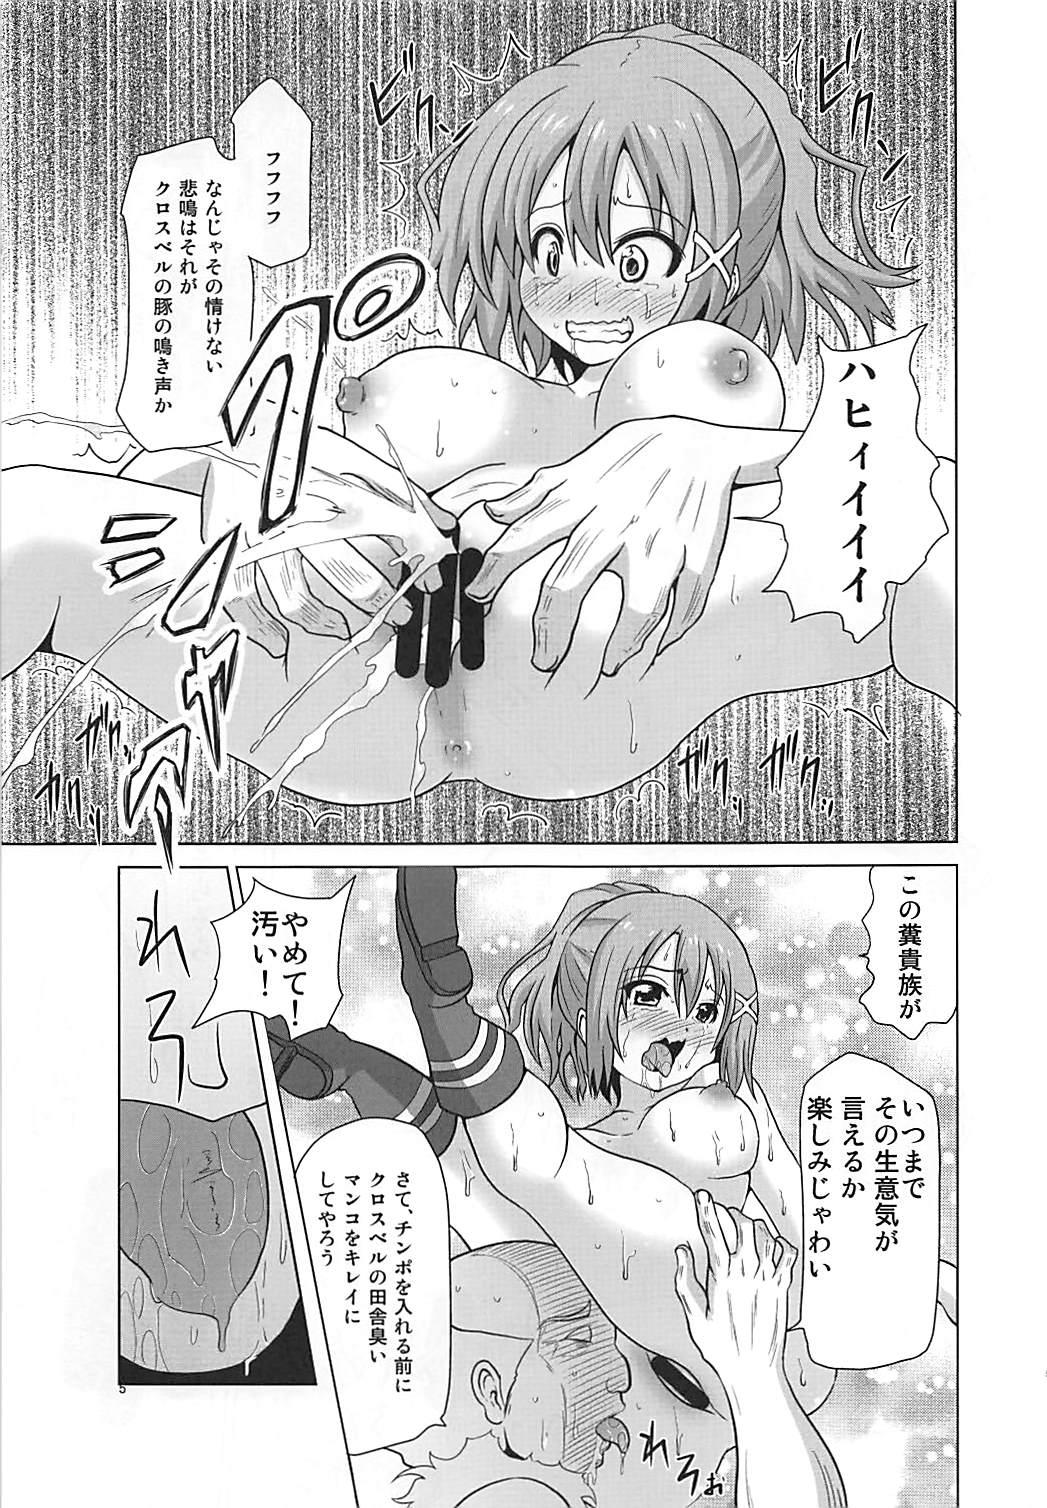 Group Sex Kurohon 4 - The legend of heroes Double - Page 4